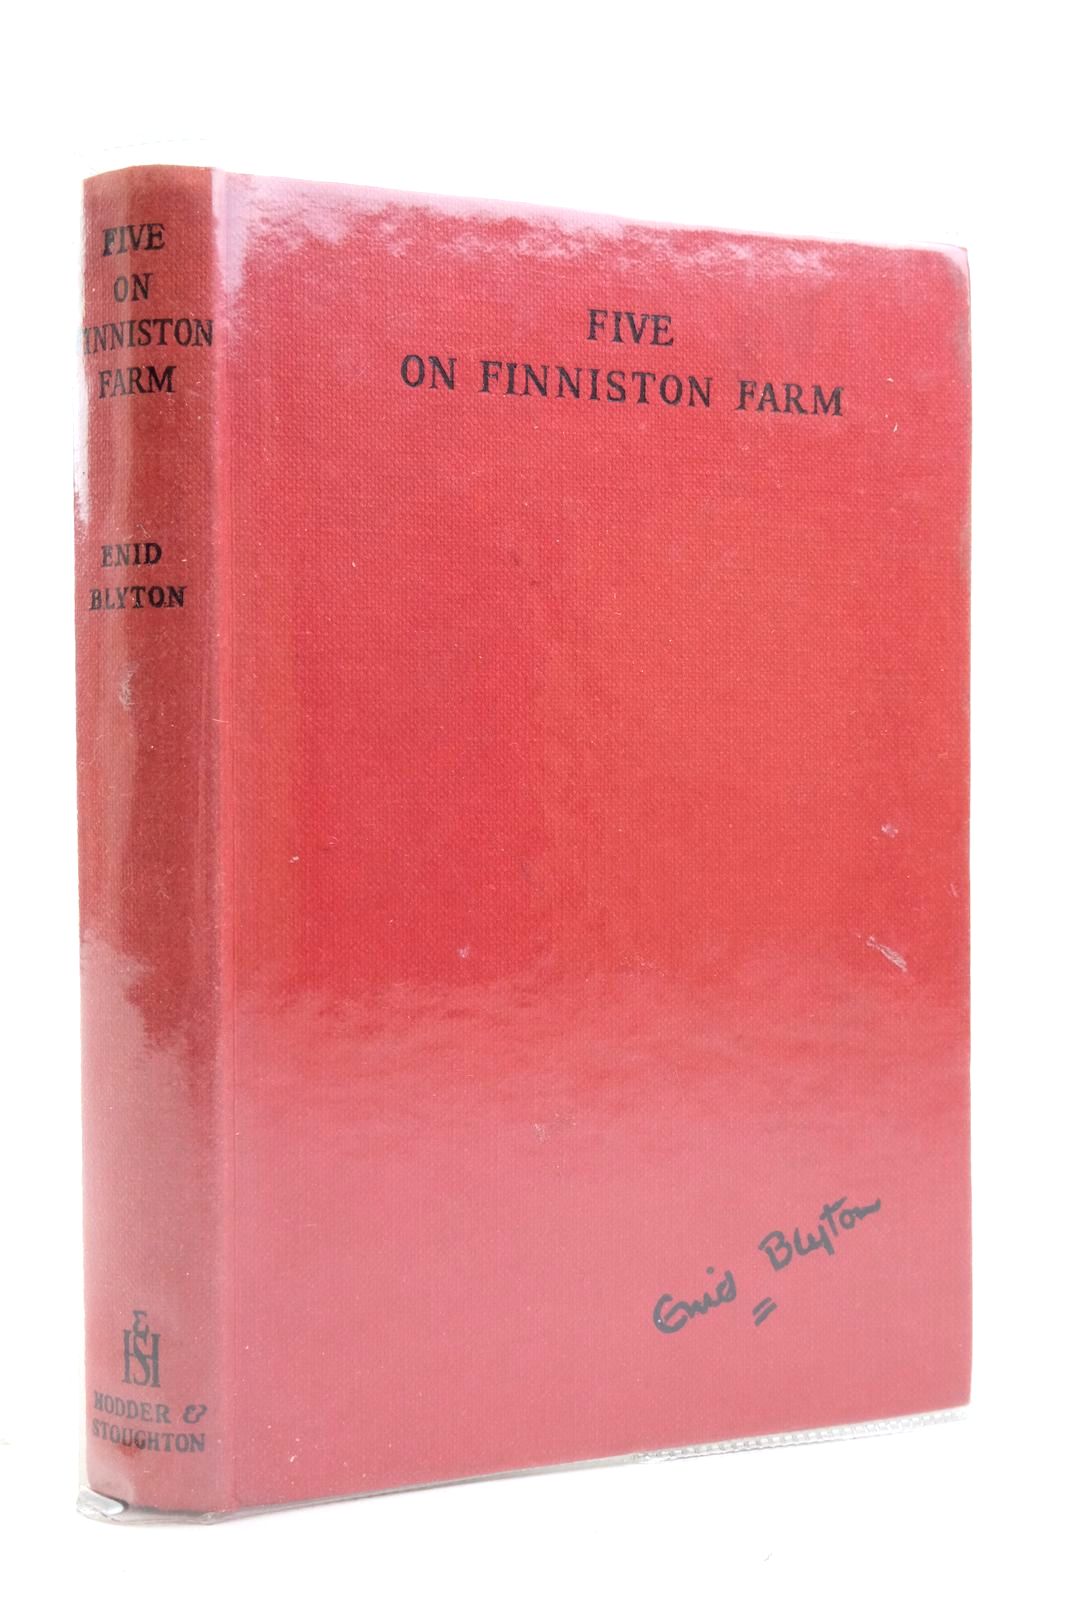 Photo of FIVE ON FINNISTON FARM written by Blyton, Enid illustrated by Soper, Eileen published by Hodder &amp; Stoughton (STOCK CODE: 2136851)  for sale by Stella & Rose's Books